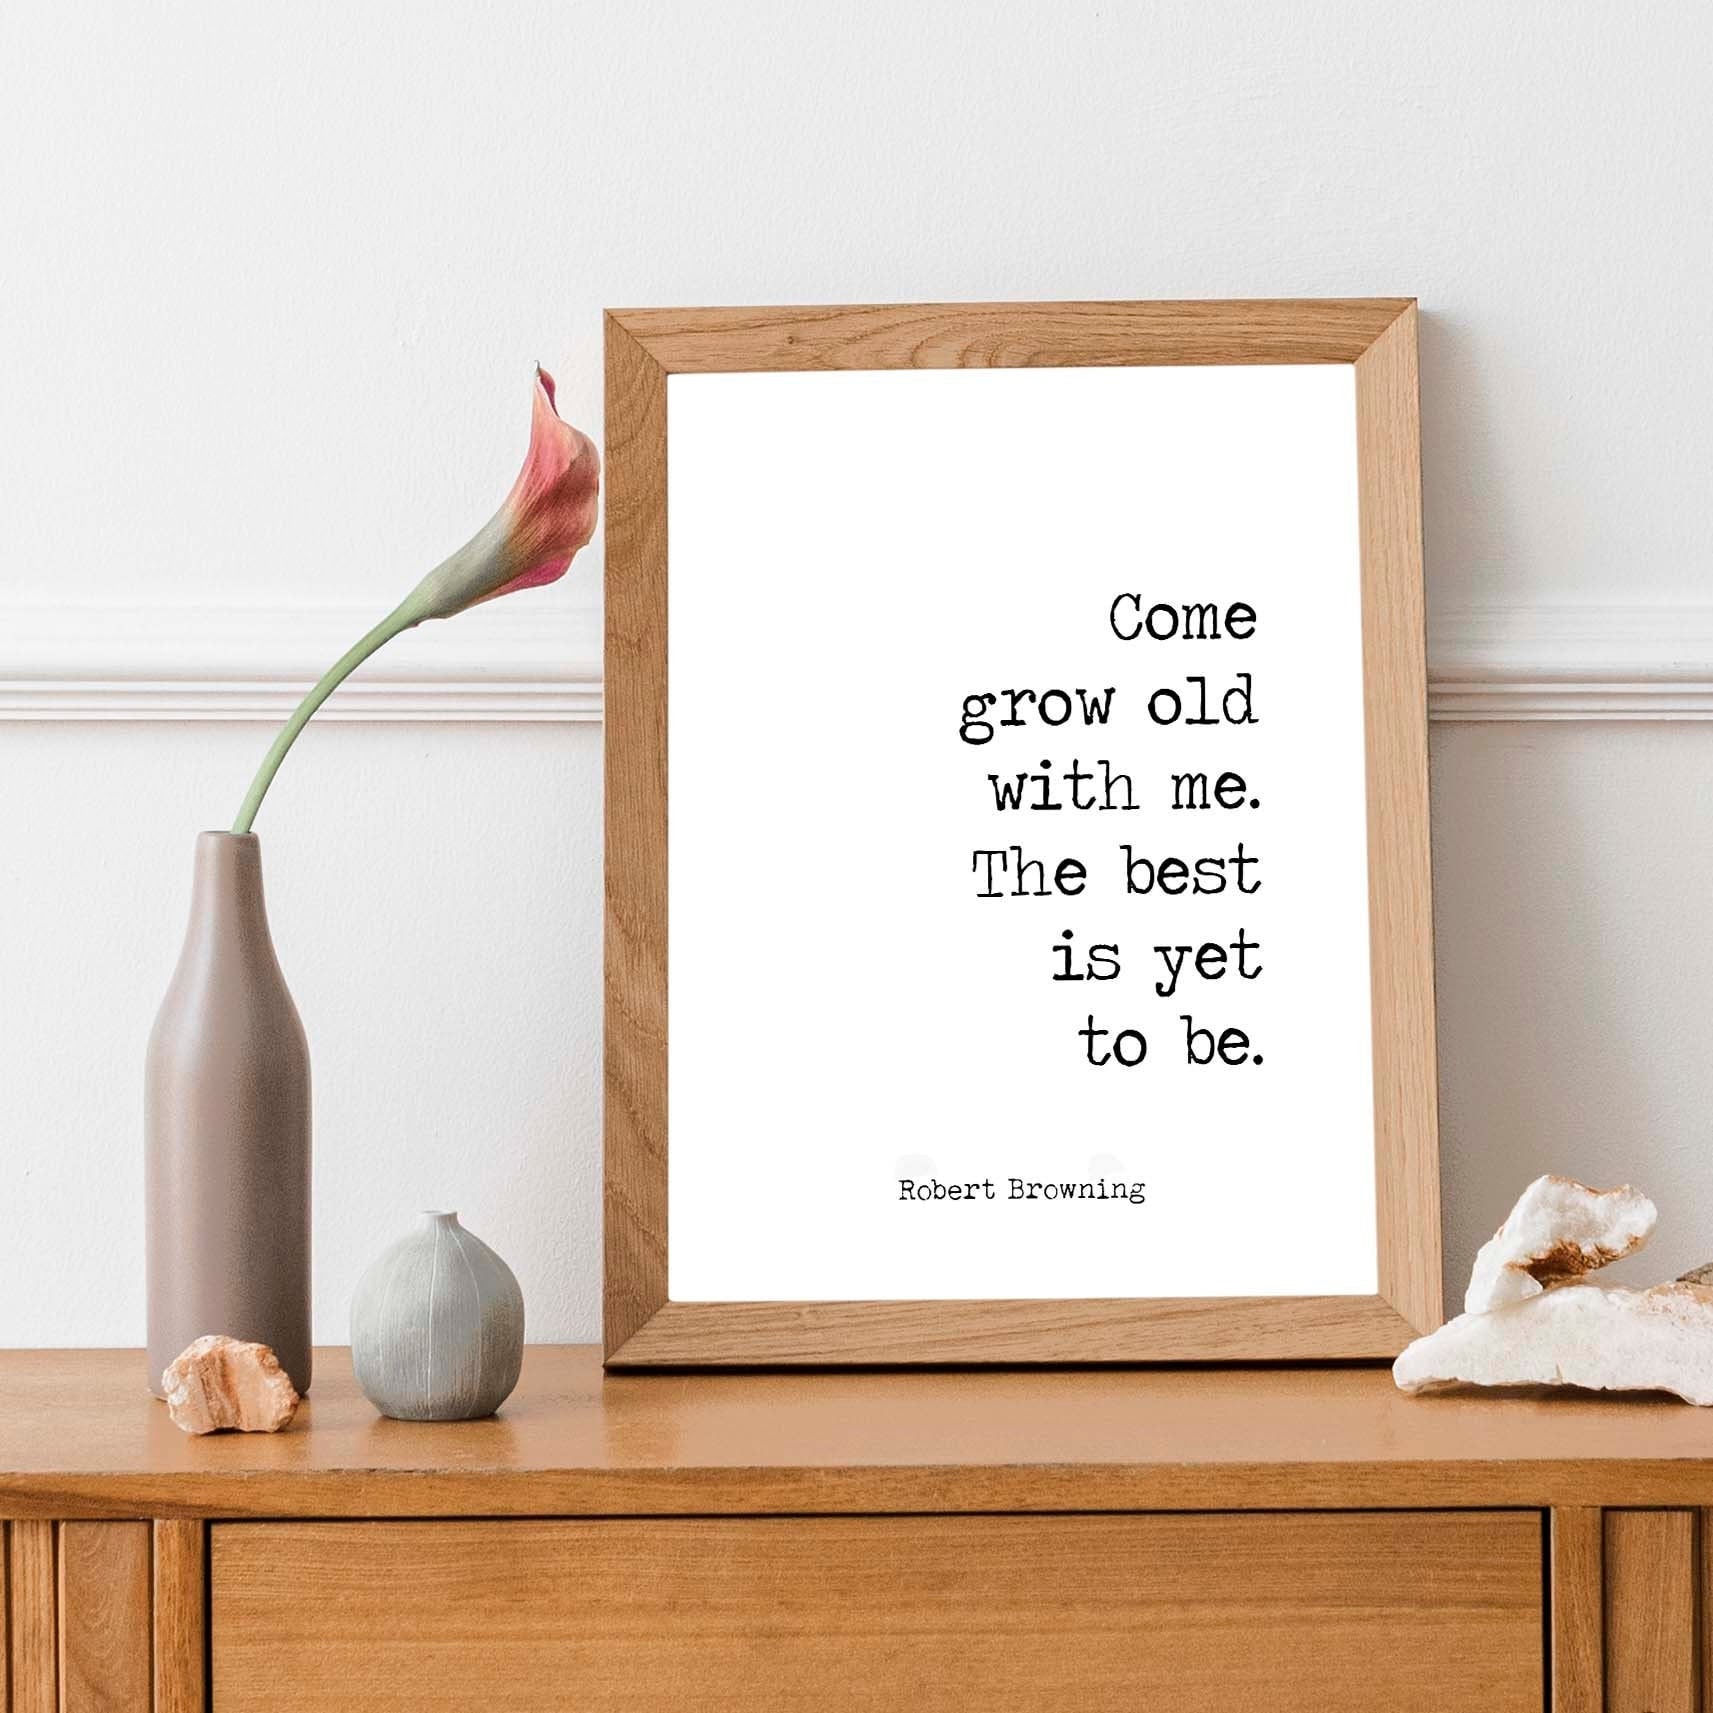 Grow Old With Me Art Print, Robert Browning Poetry in Black and White